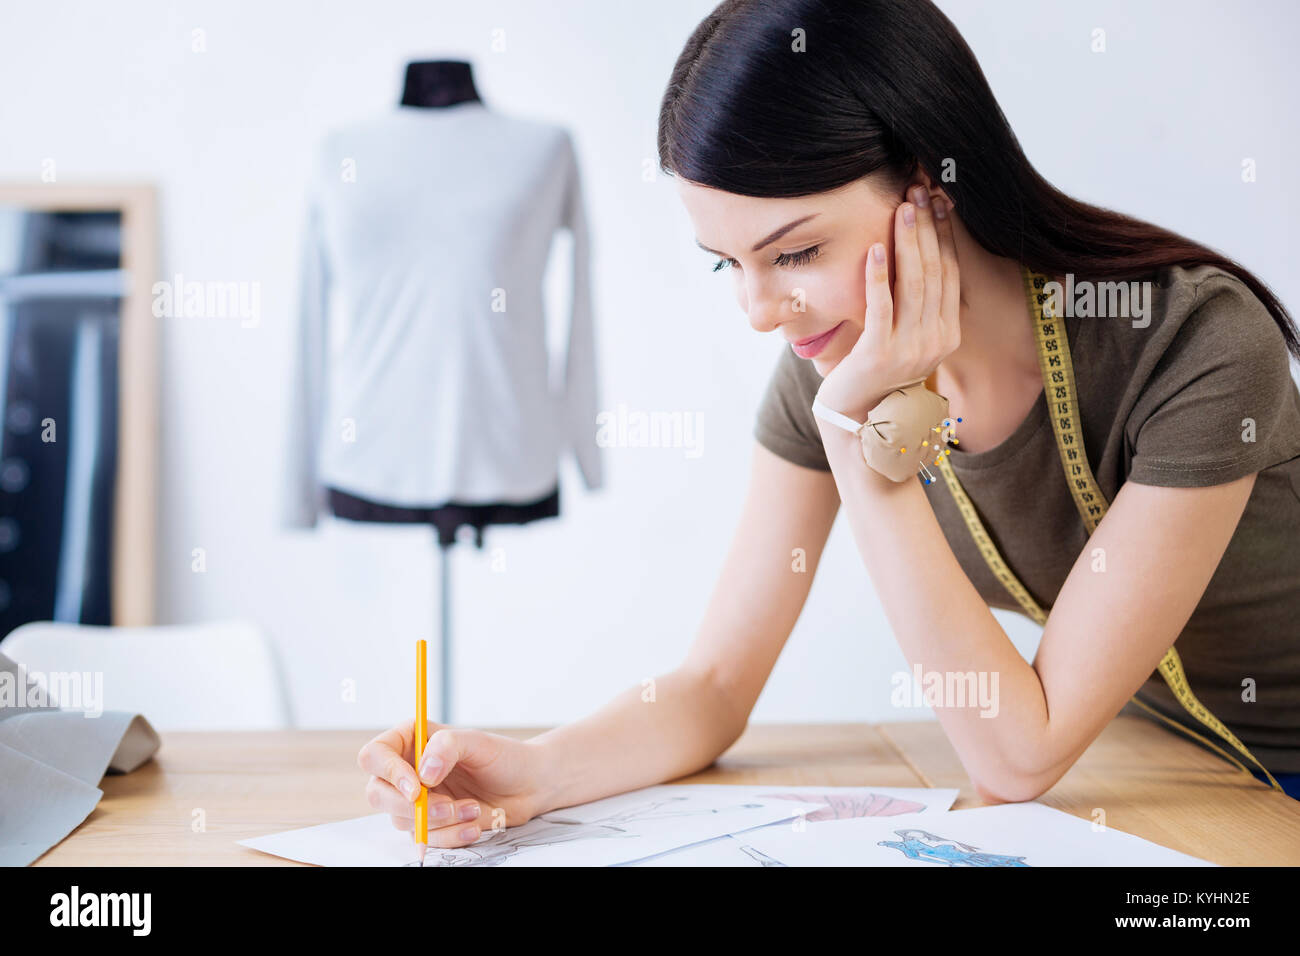 Calm young woman looking pleased while drawing Stock Photo